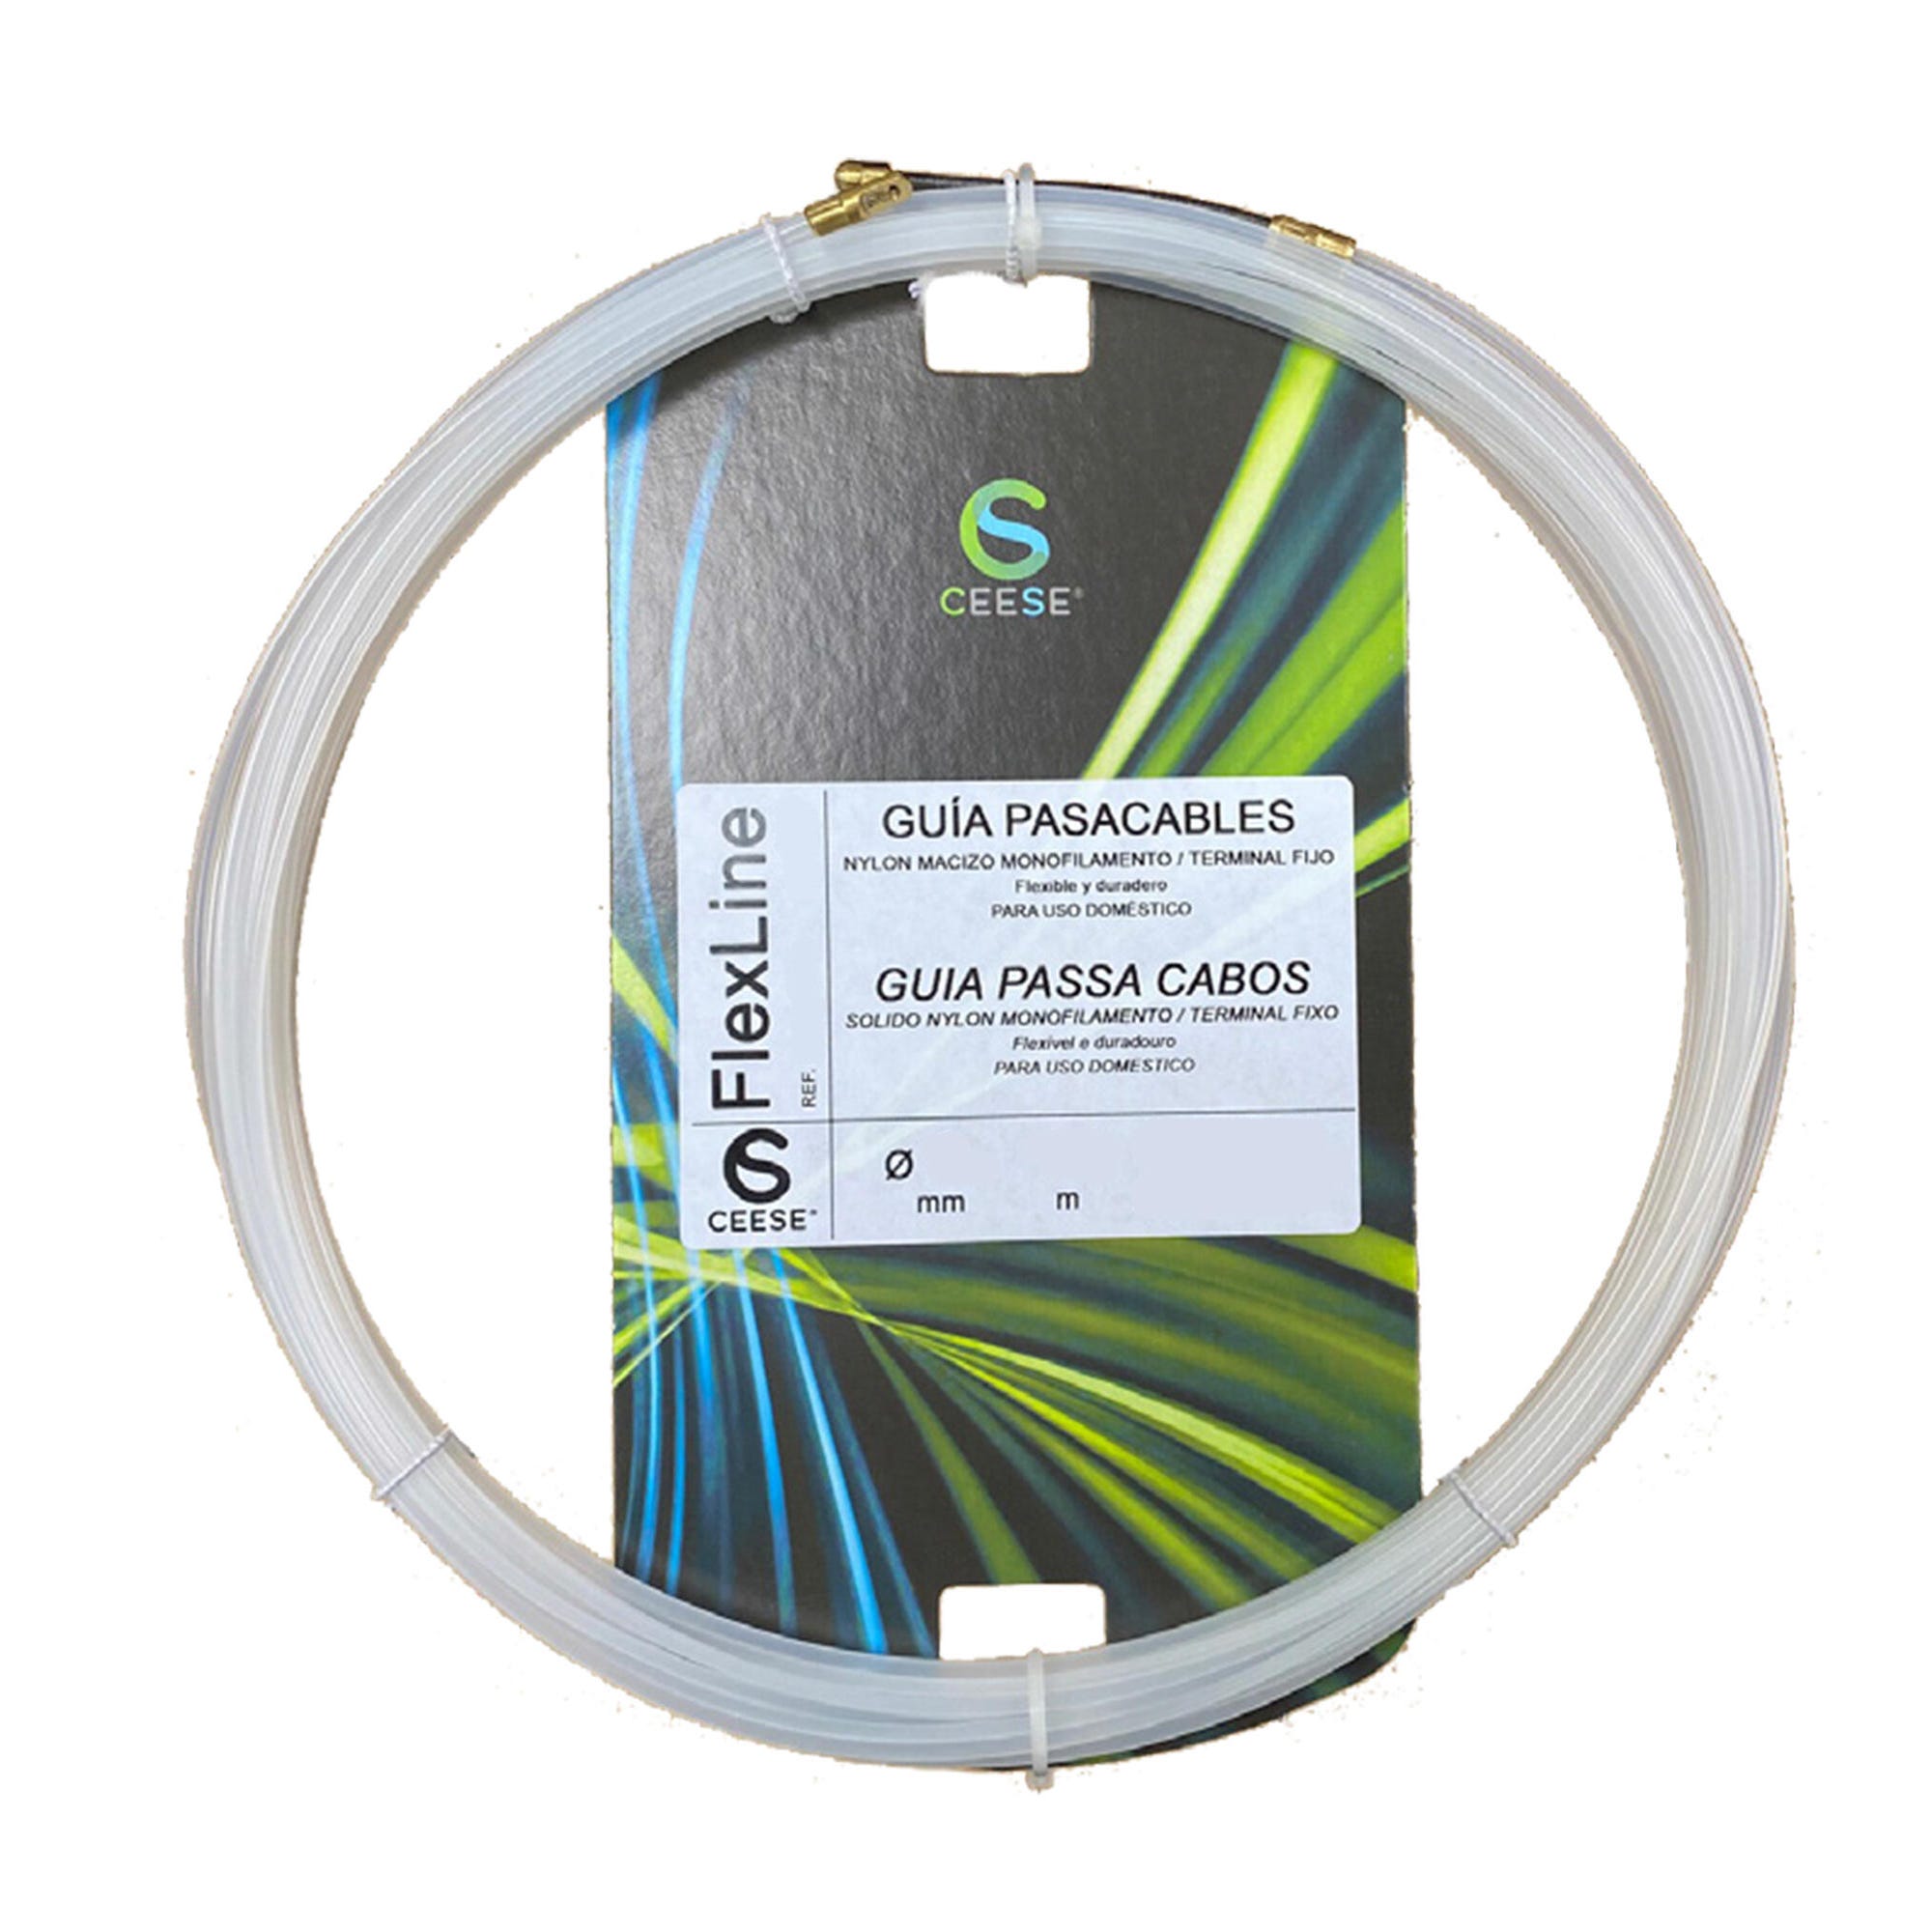 Guia Pasacables, 50m 4,5mm Guia Pasacables Profesional Guia Cables